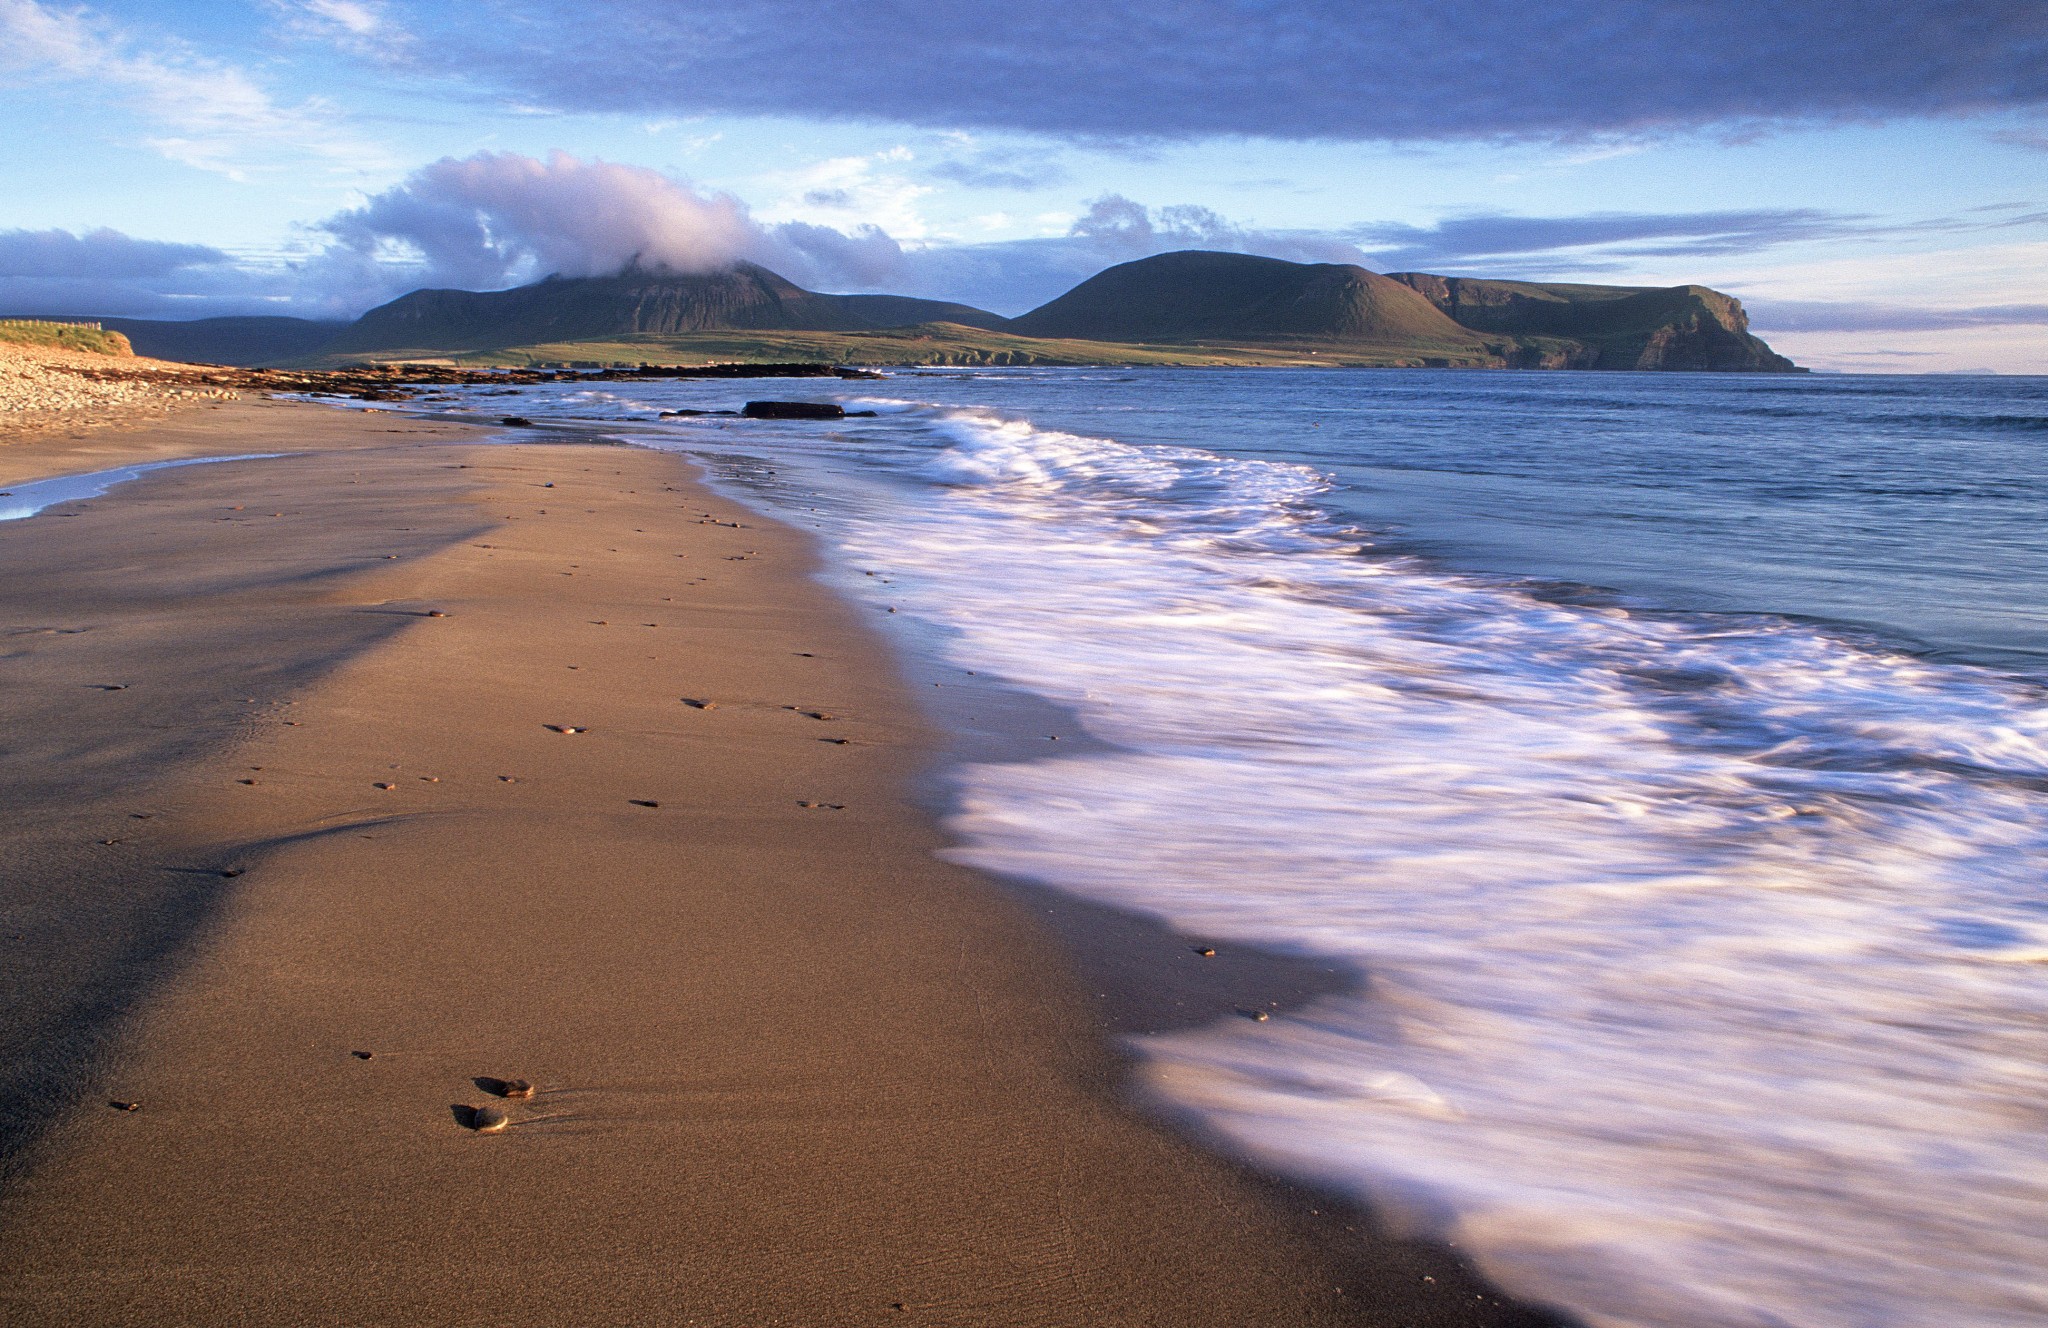 Warebeth, Orkney - image by VisitScotland/Iain Sarjeant